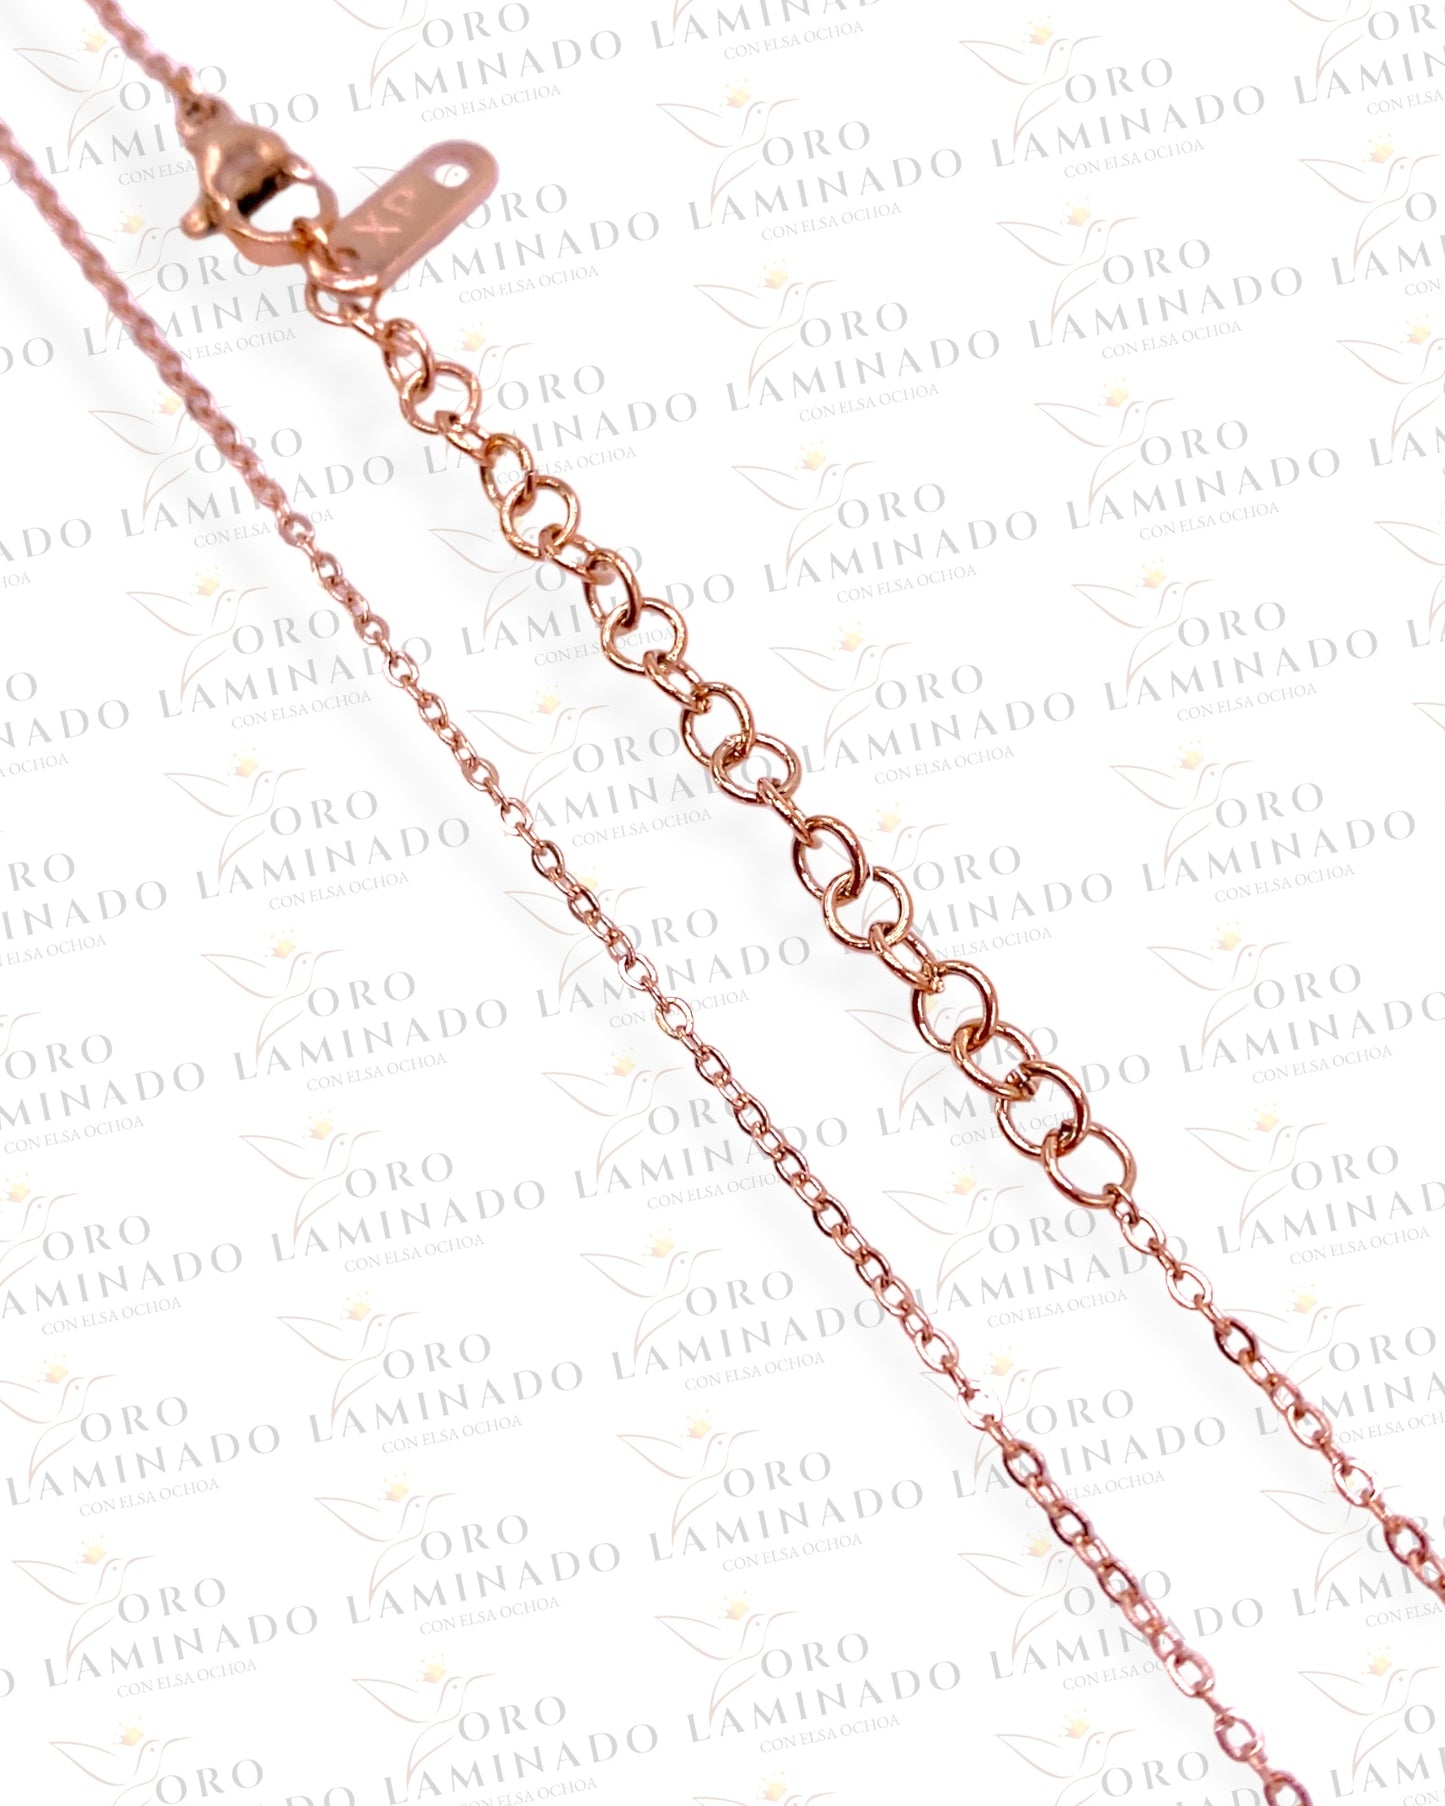 High Quality 0.6” Downward Moon Pendant and Chain Y105